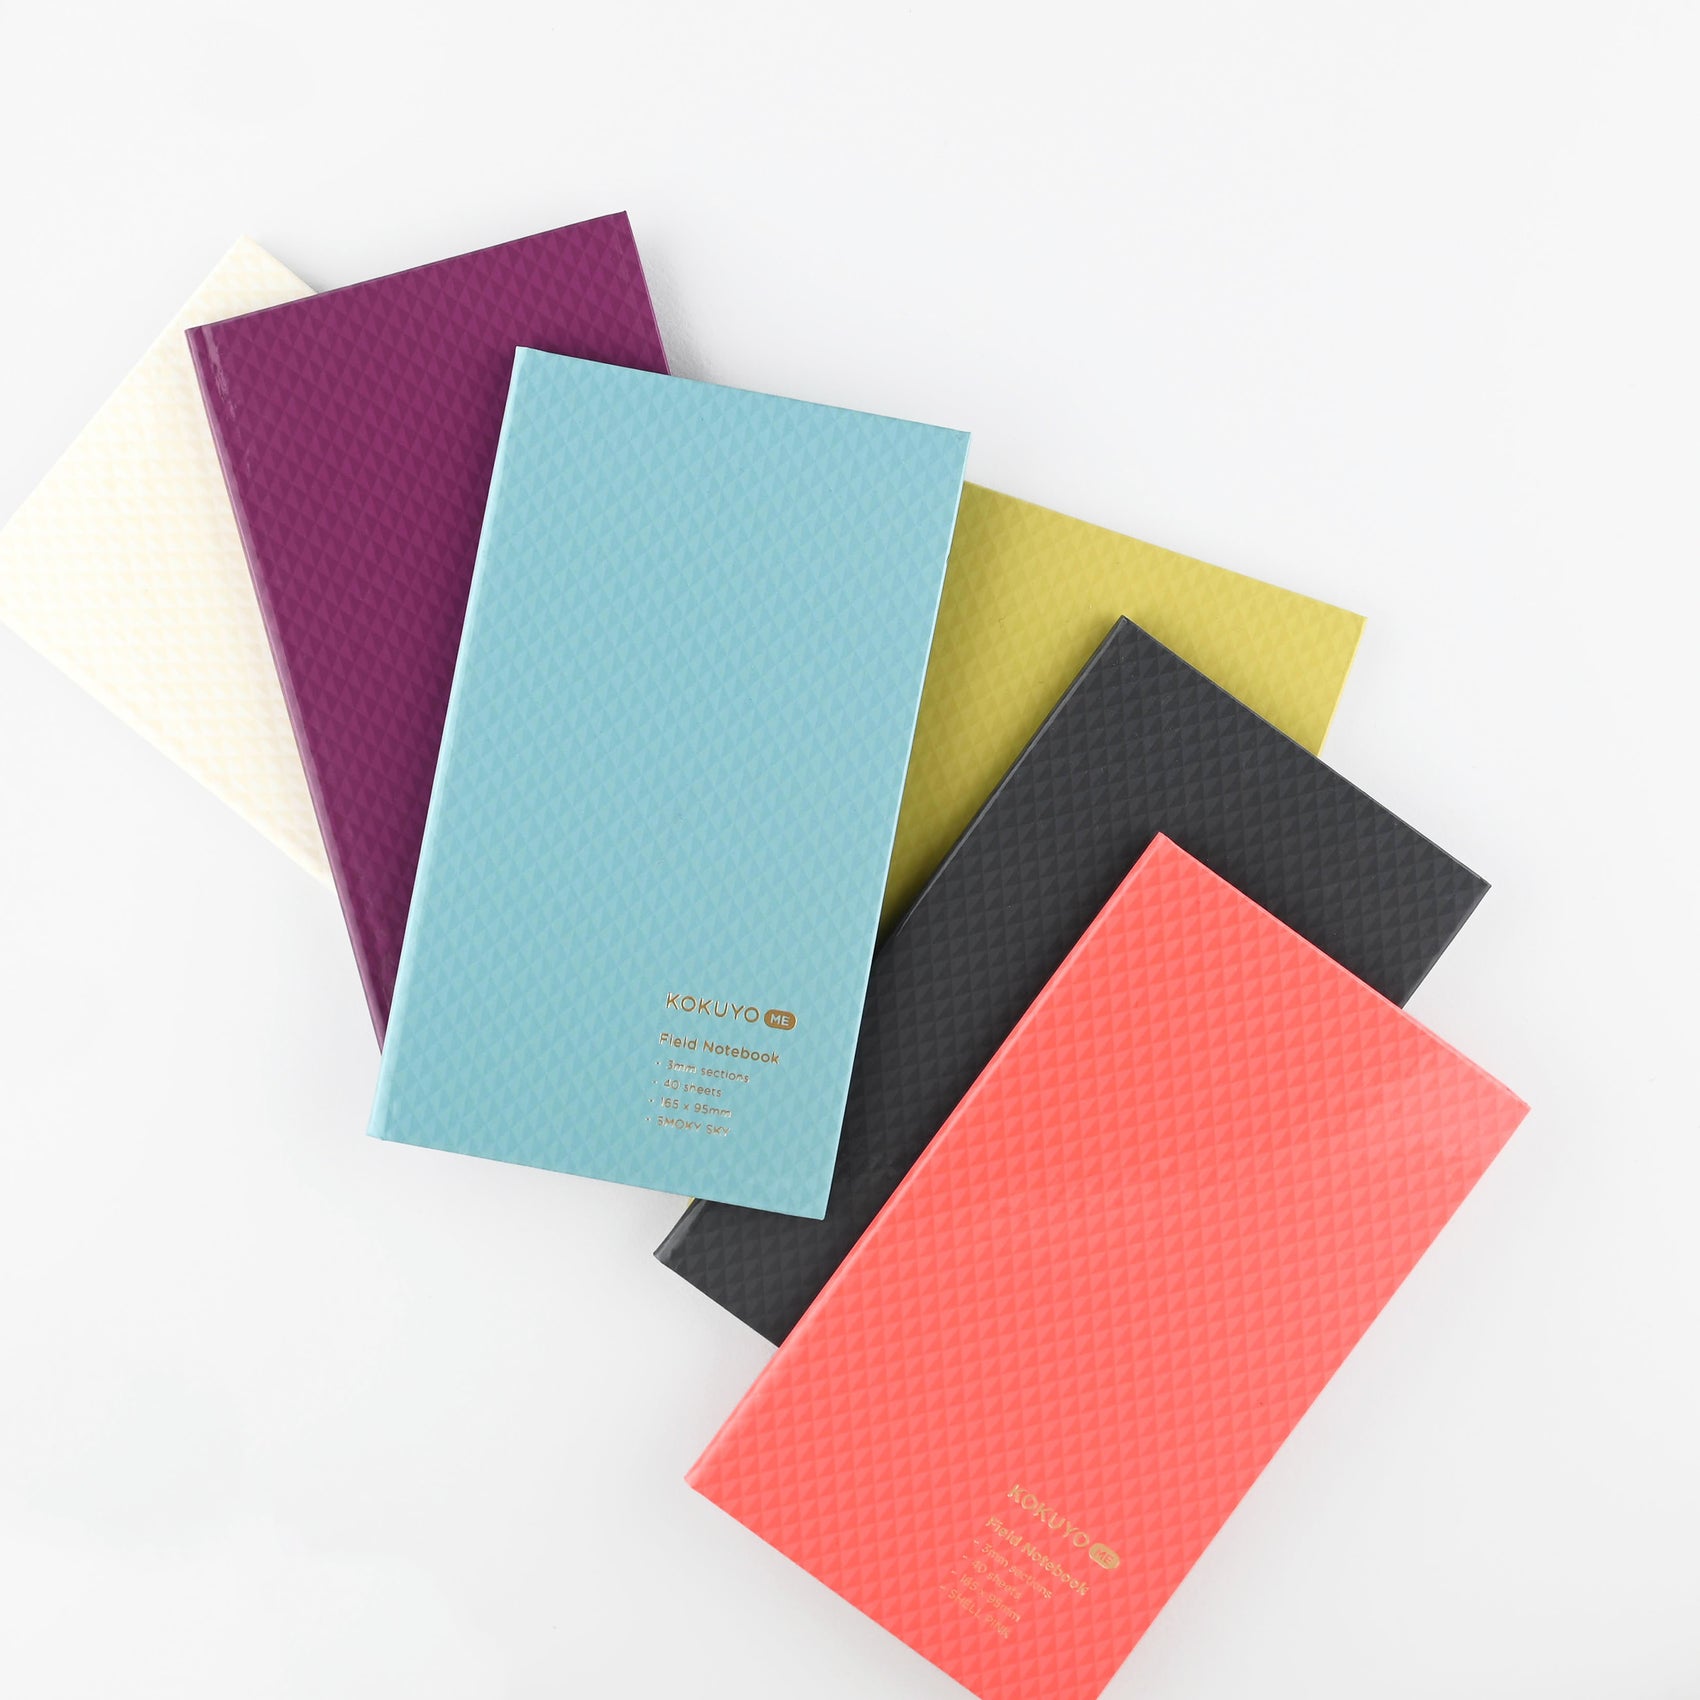 Field Notebook | 6 Colors